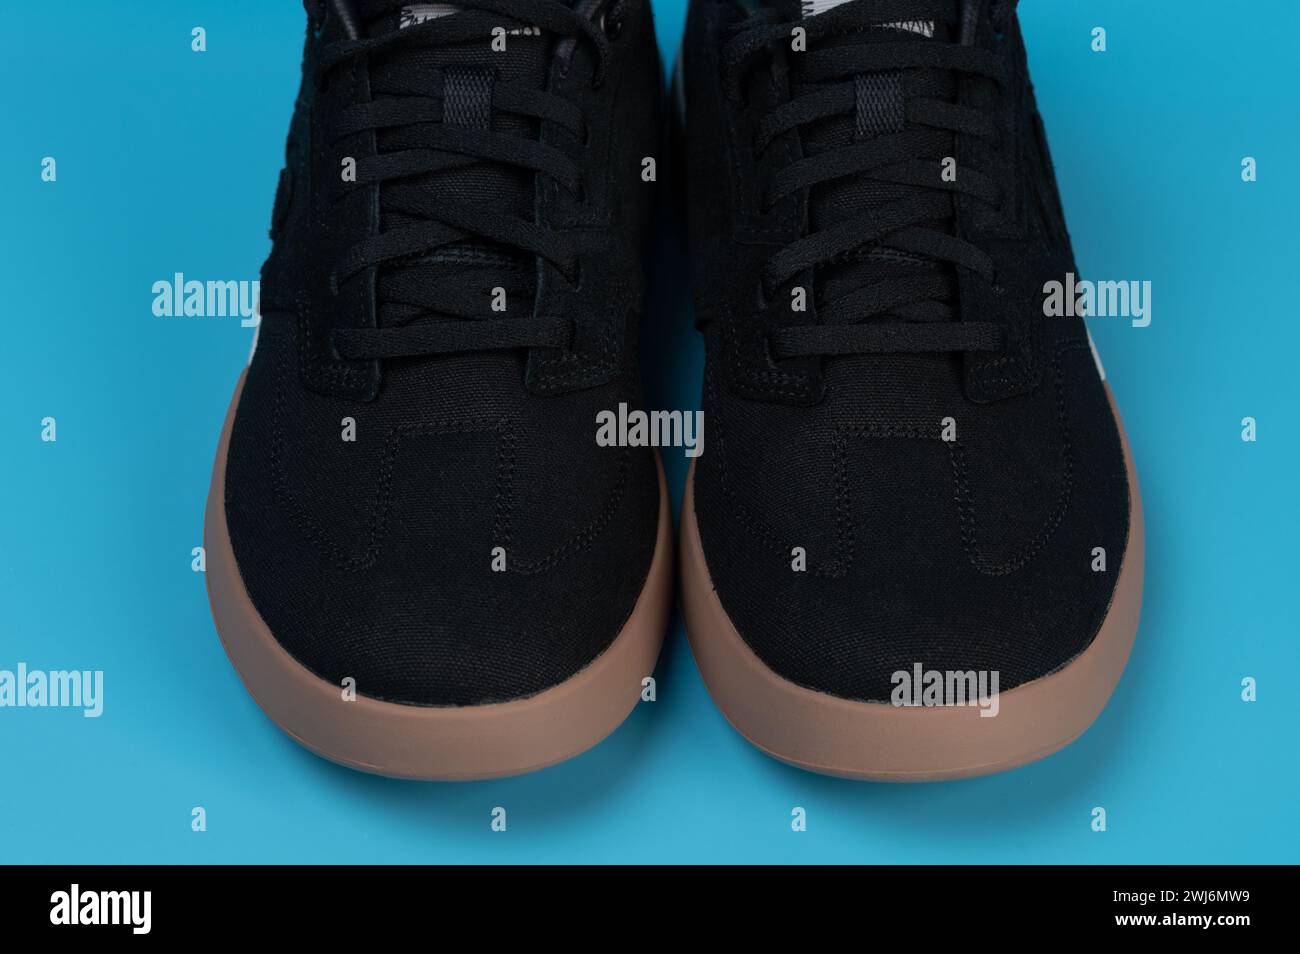 Black sneakers shoes close up view isolated Stock Photo